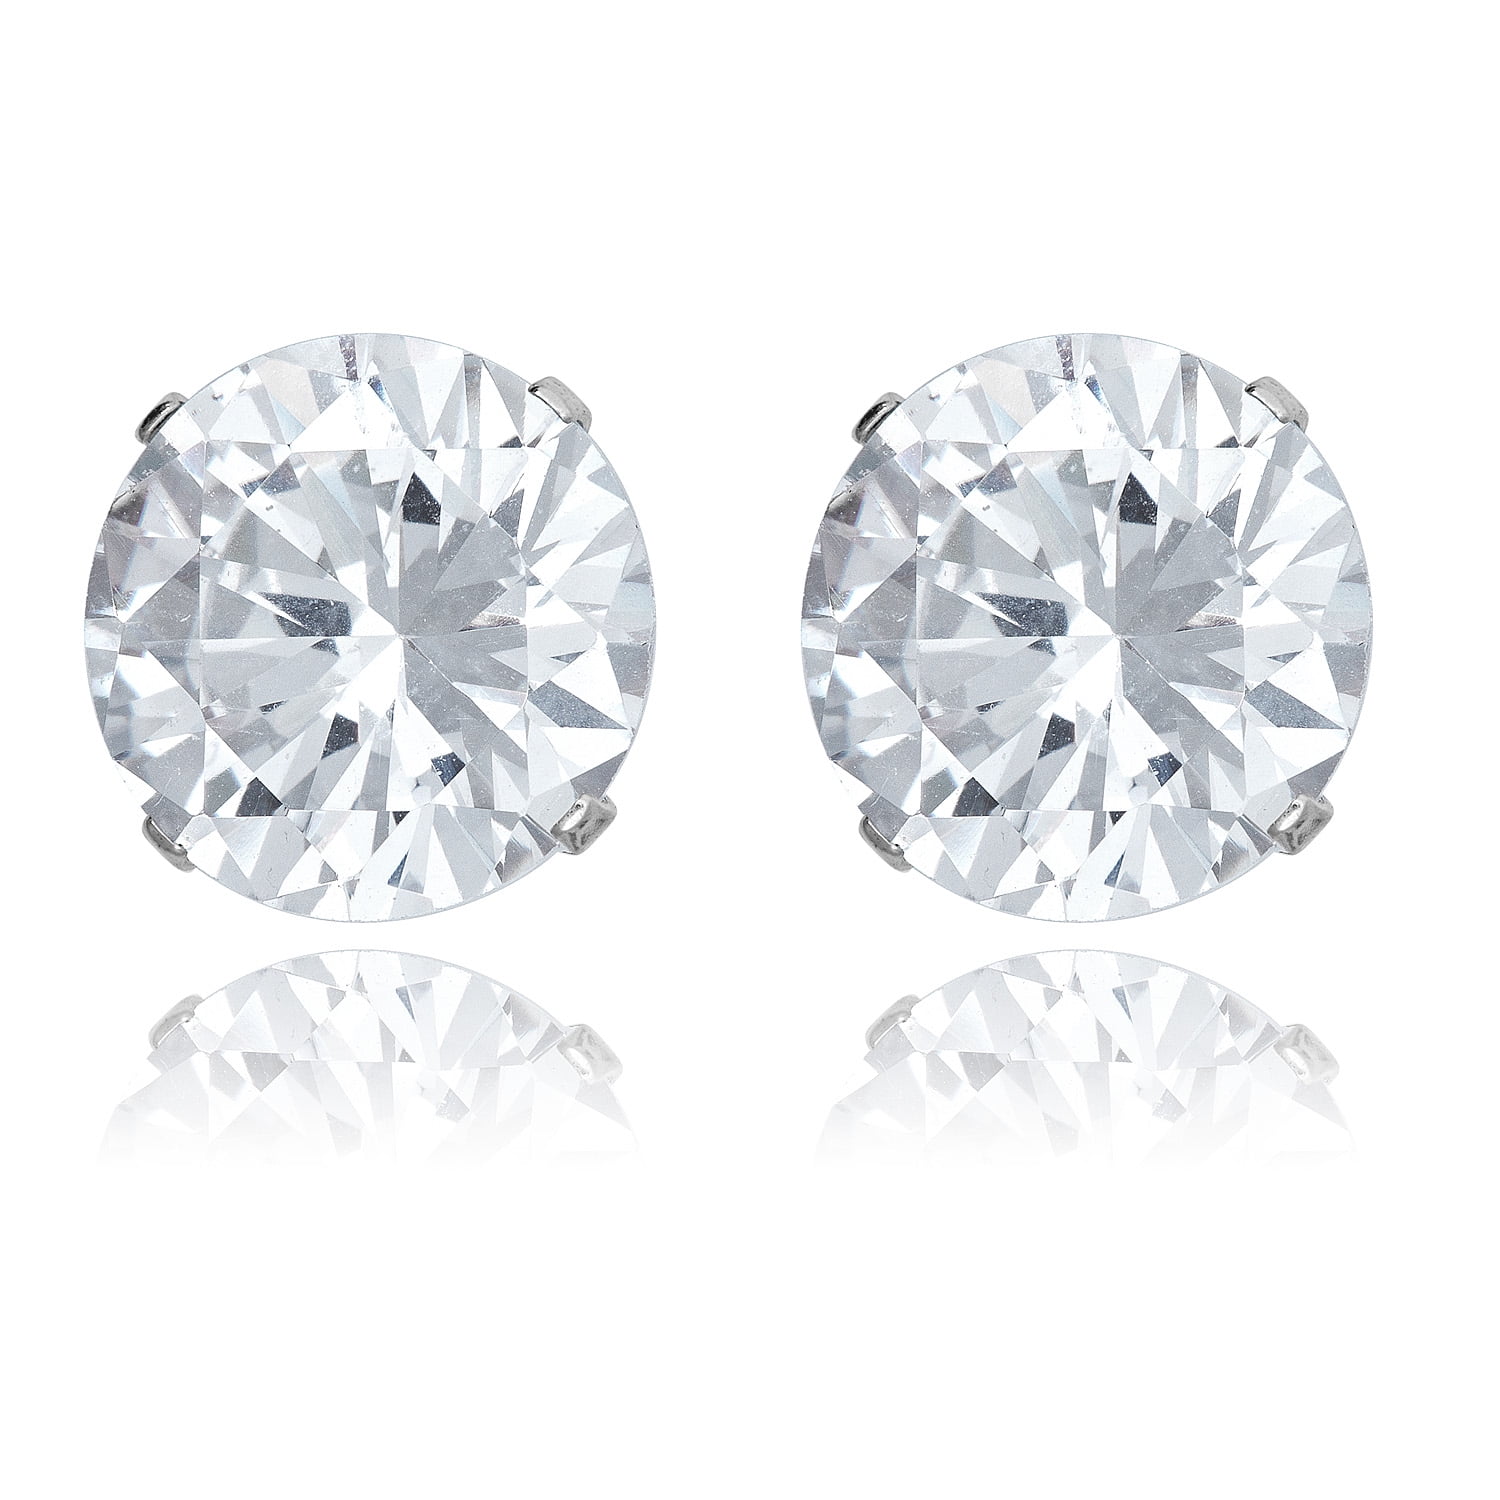 Sterling Silver Round Double Cubic Zirconia Stud Earrings Hallmarked 925